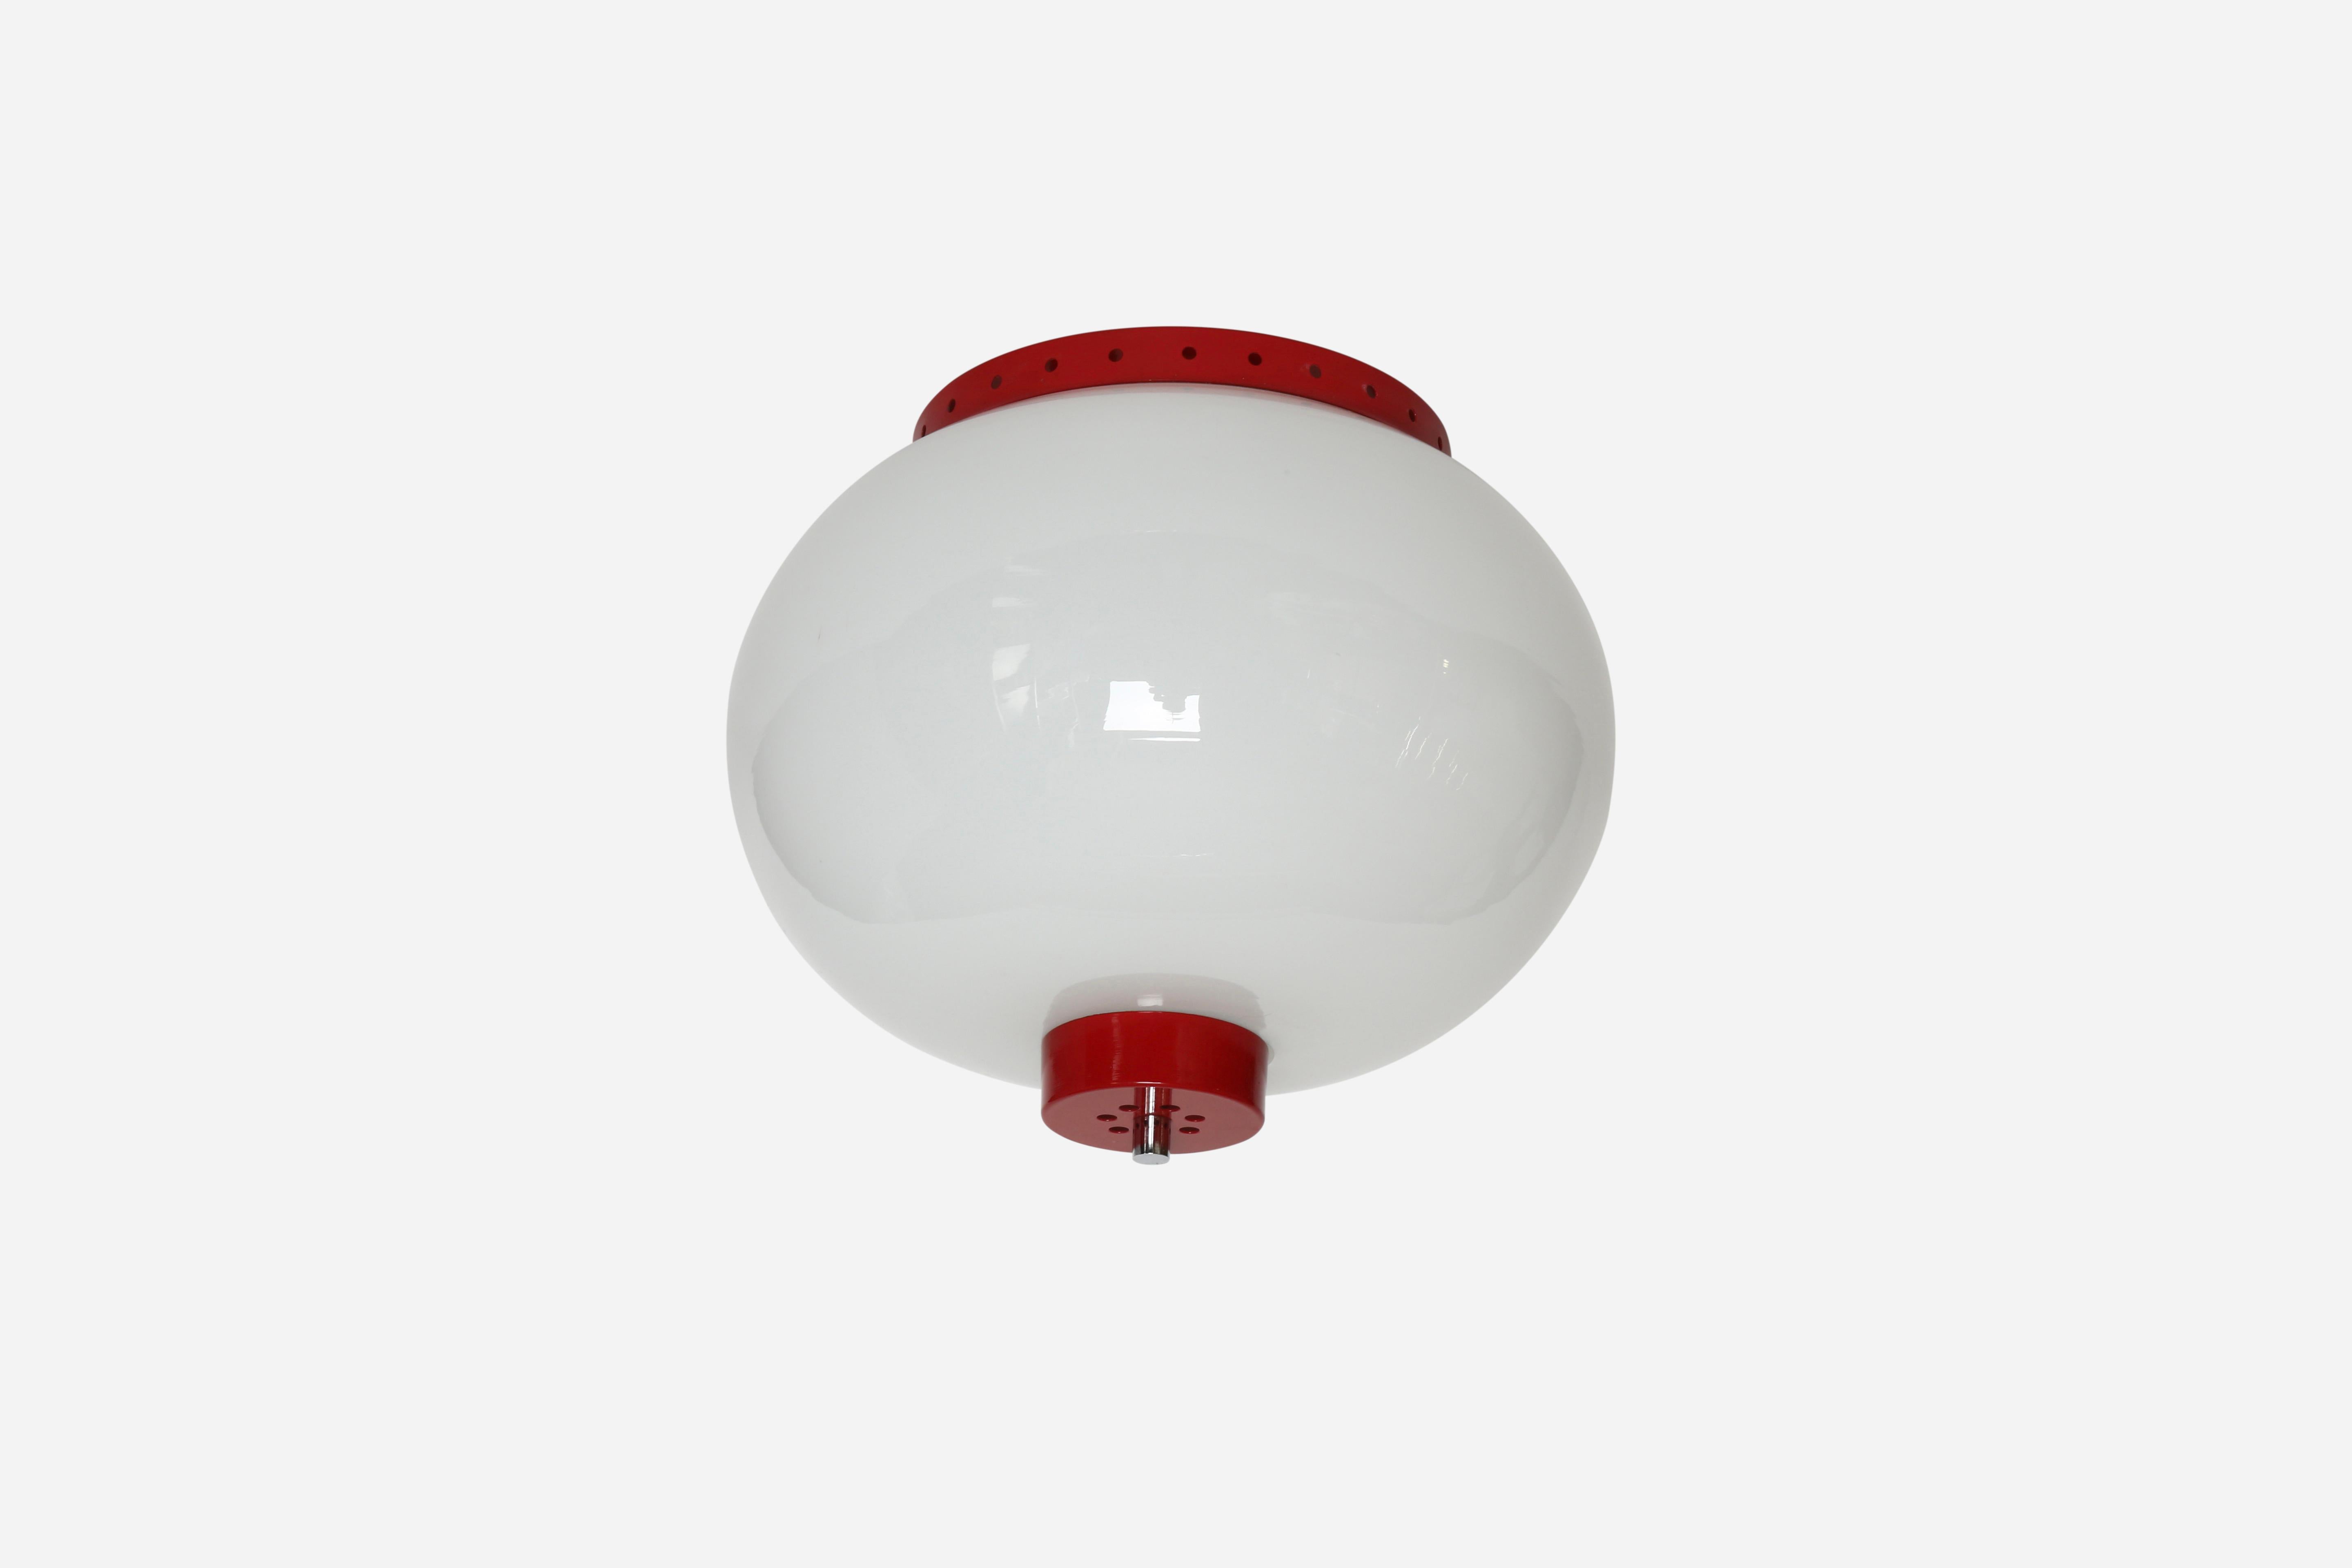 Stilnovo style flush mount ceiling lights, a pair
Made in Italy, 1960s
Opaline glass, enameled metal.
Take 3 candelabra bulbs each.
Complimentary US rewiring upon request.
Priced and sold as a pair.

At Illustris Lighting our main focus is to